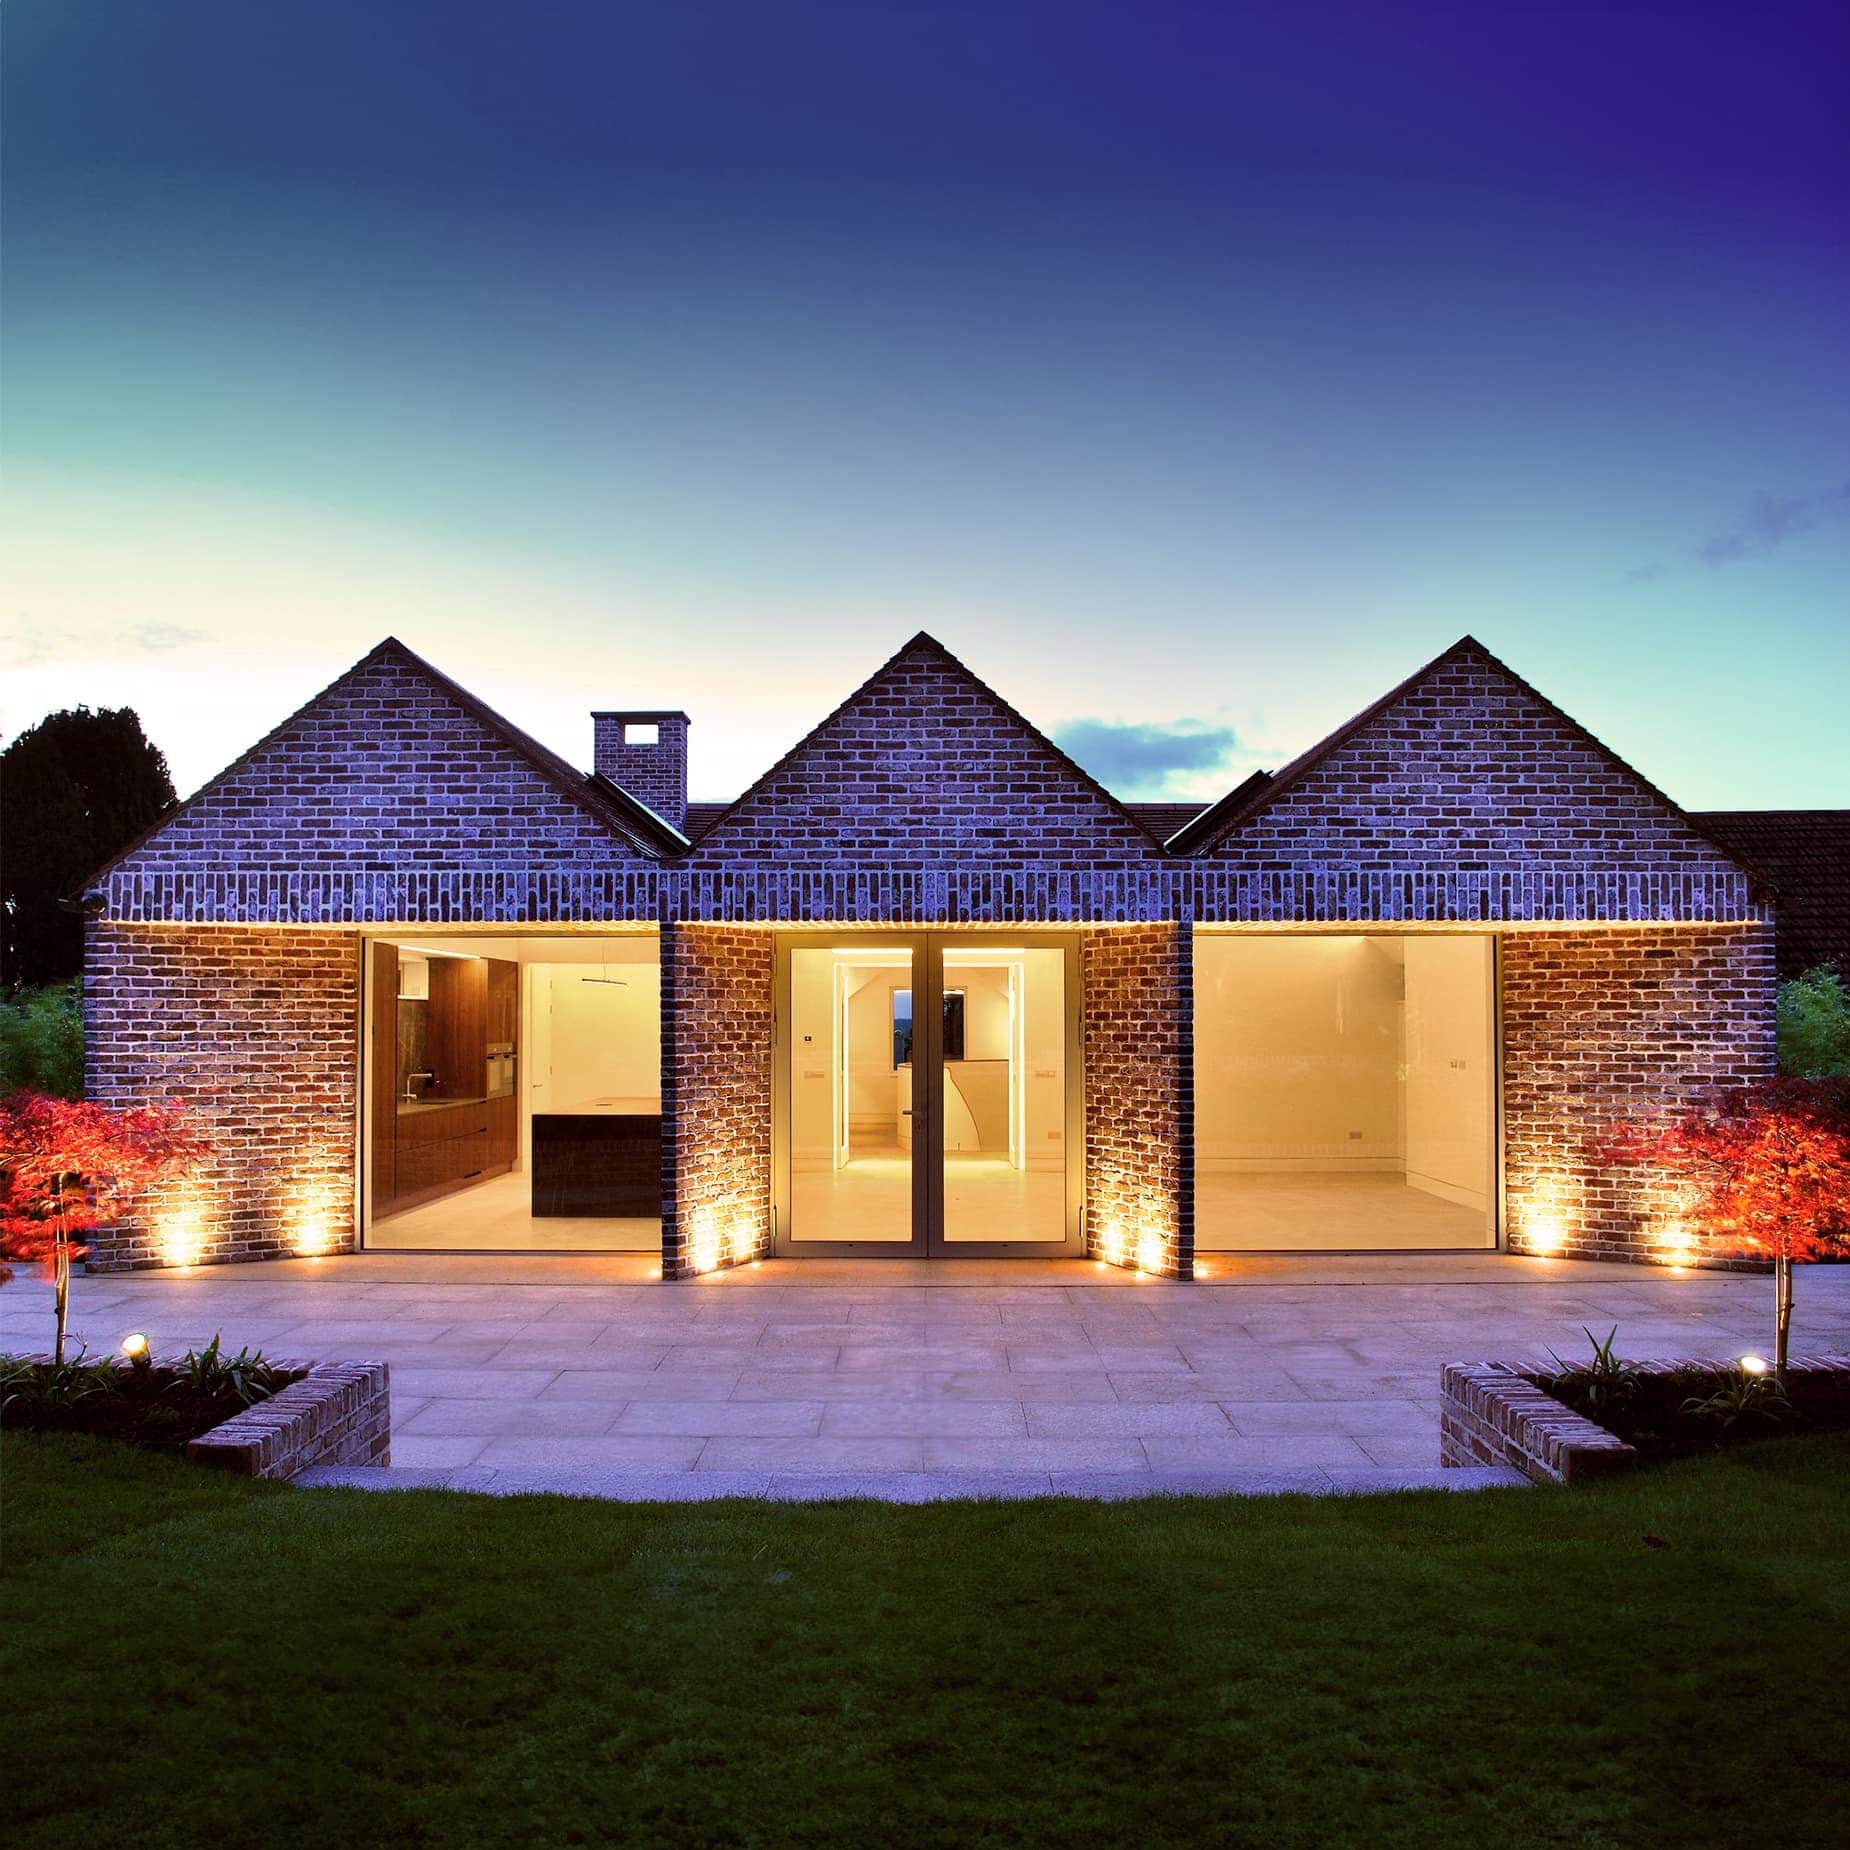 Gabled elevation of a South Dublin brick house at dusk, lit by exterior lights